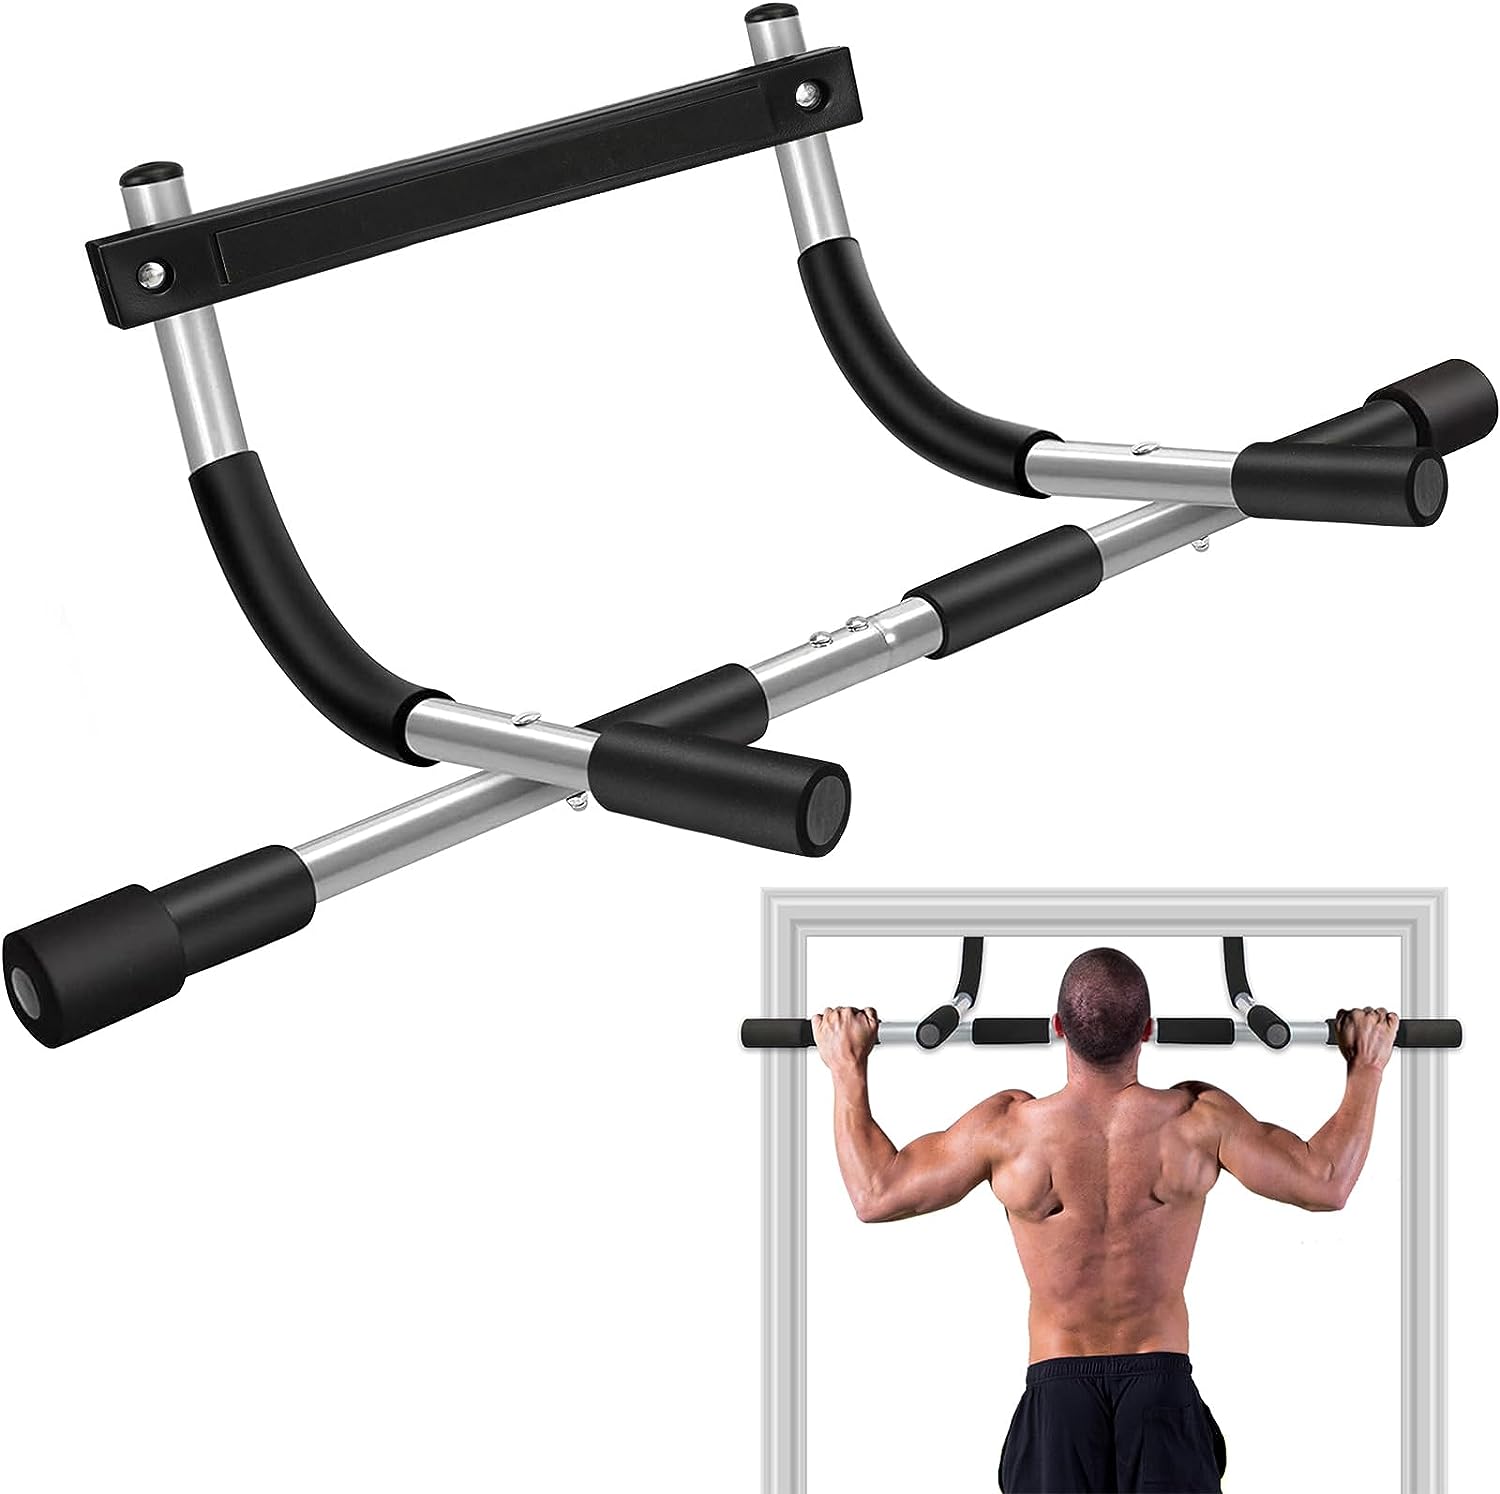  TOPOKO Upgrade Pull Up Bar for Doorway, Max Capacity 440 lbs Chin Up Bar, No Screws Portable Upper Body Fitness Workout Bar, Strength Training Door Frame Pull-up Bars, Hanging Bar for Exercise, Door Workout Bar with Foam Grips, Indoor Pullup Bars Fitness Trainer for Home 